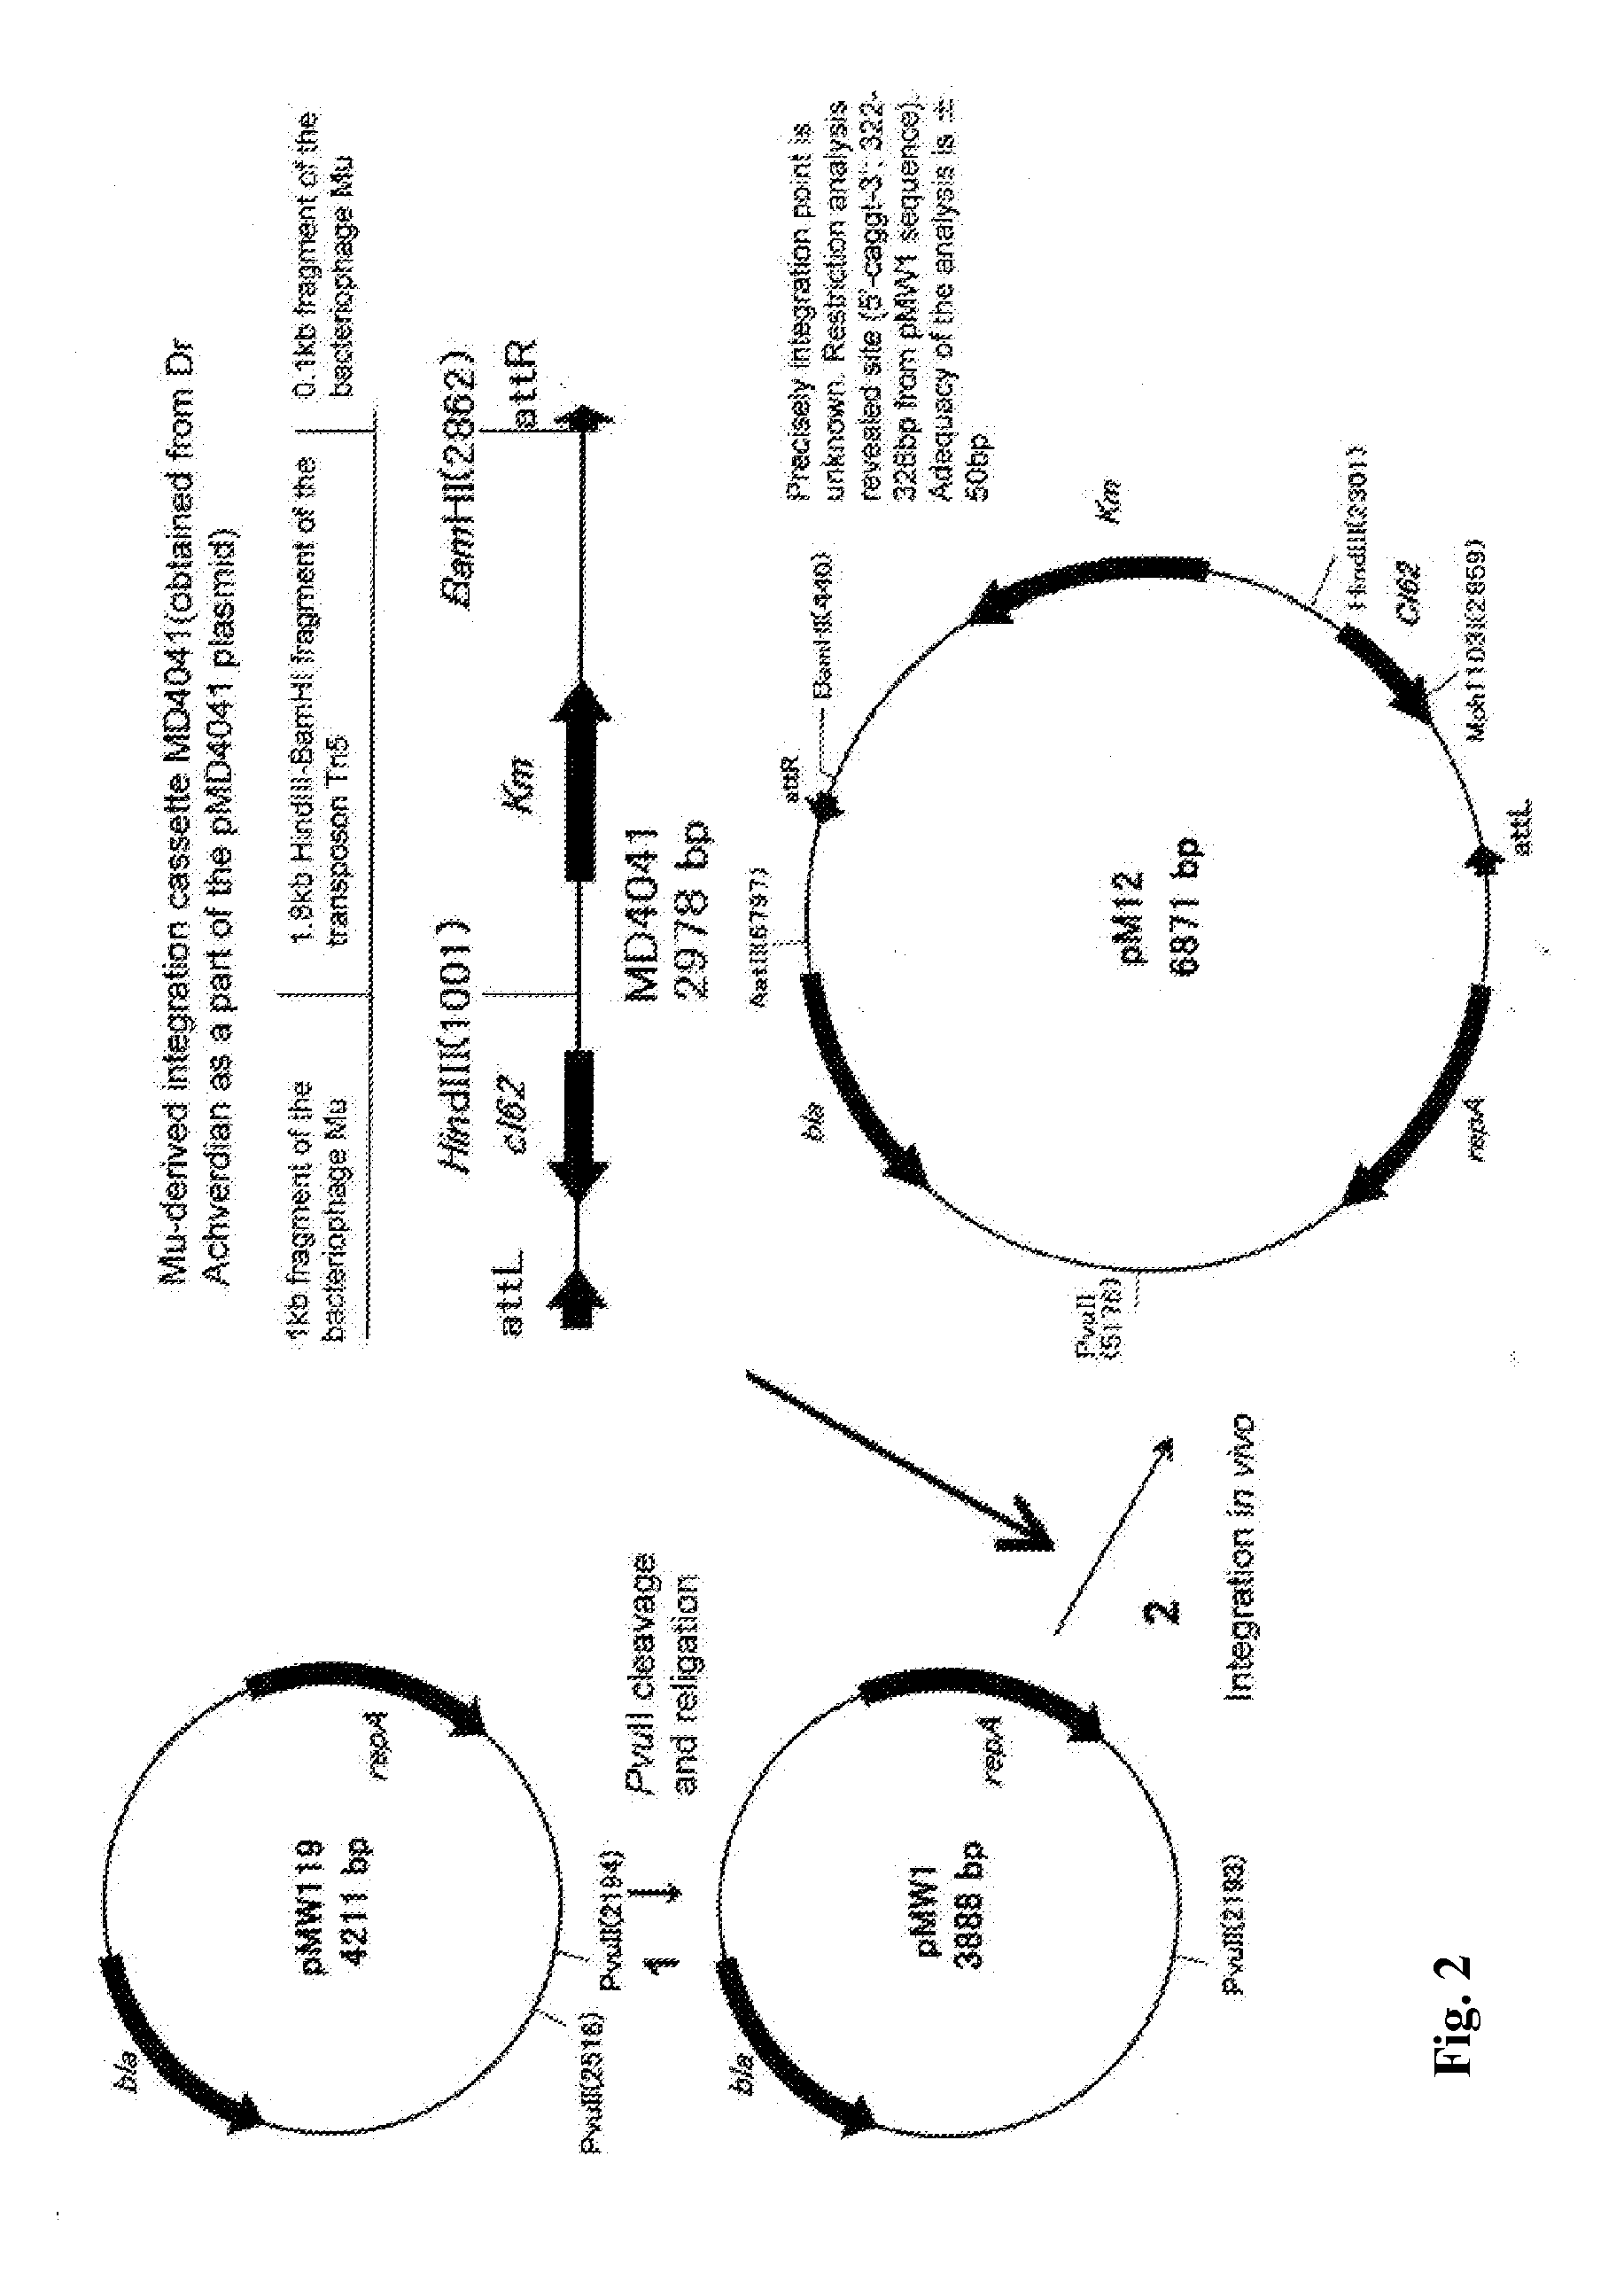 Method for producing an l-cysteine, l-cystine, a derivative or precursor thereof or a mixture thereof using a bacterium of enterobacteriaceae family